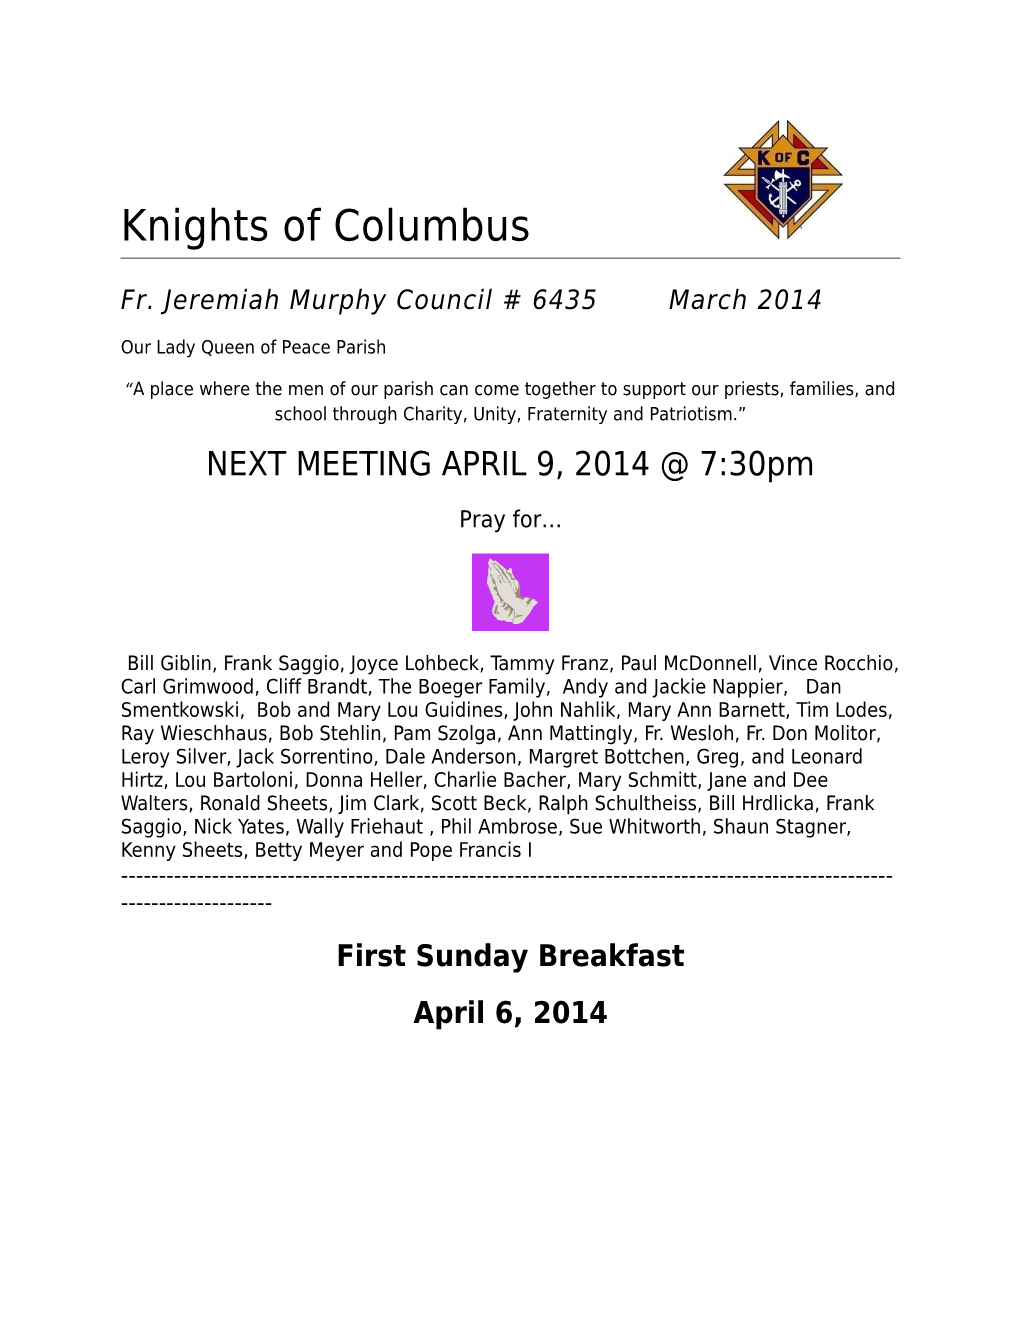 Knights of Columbus s2